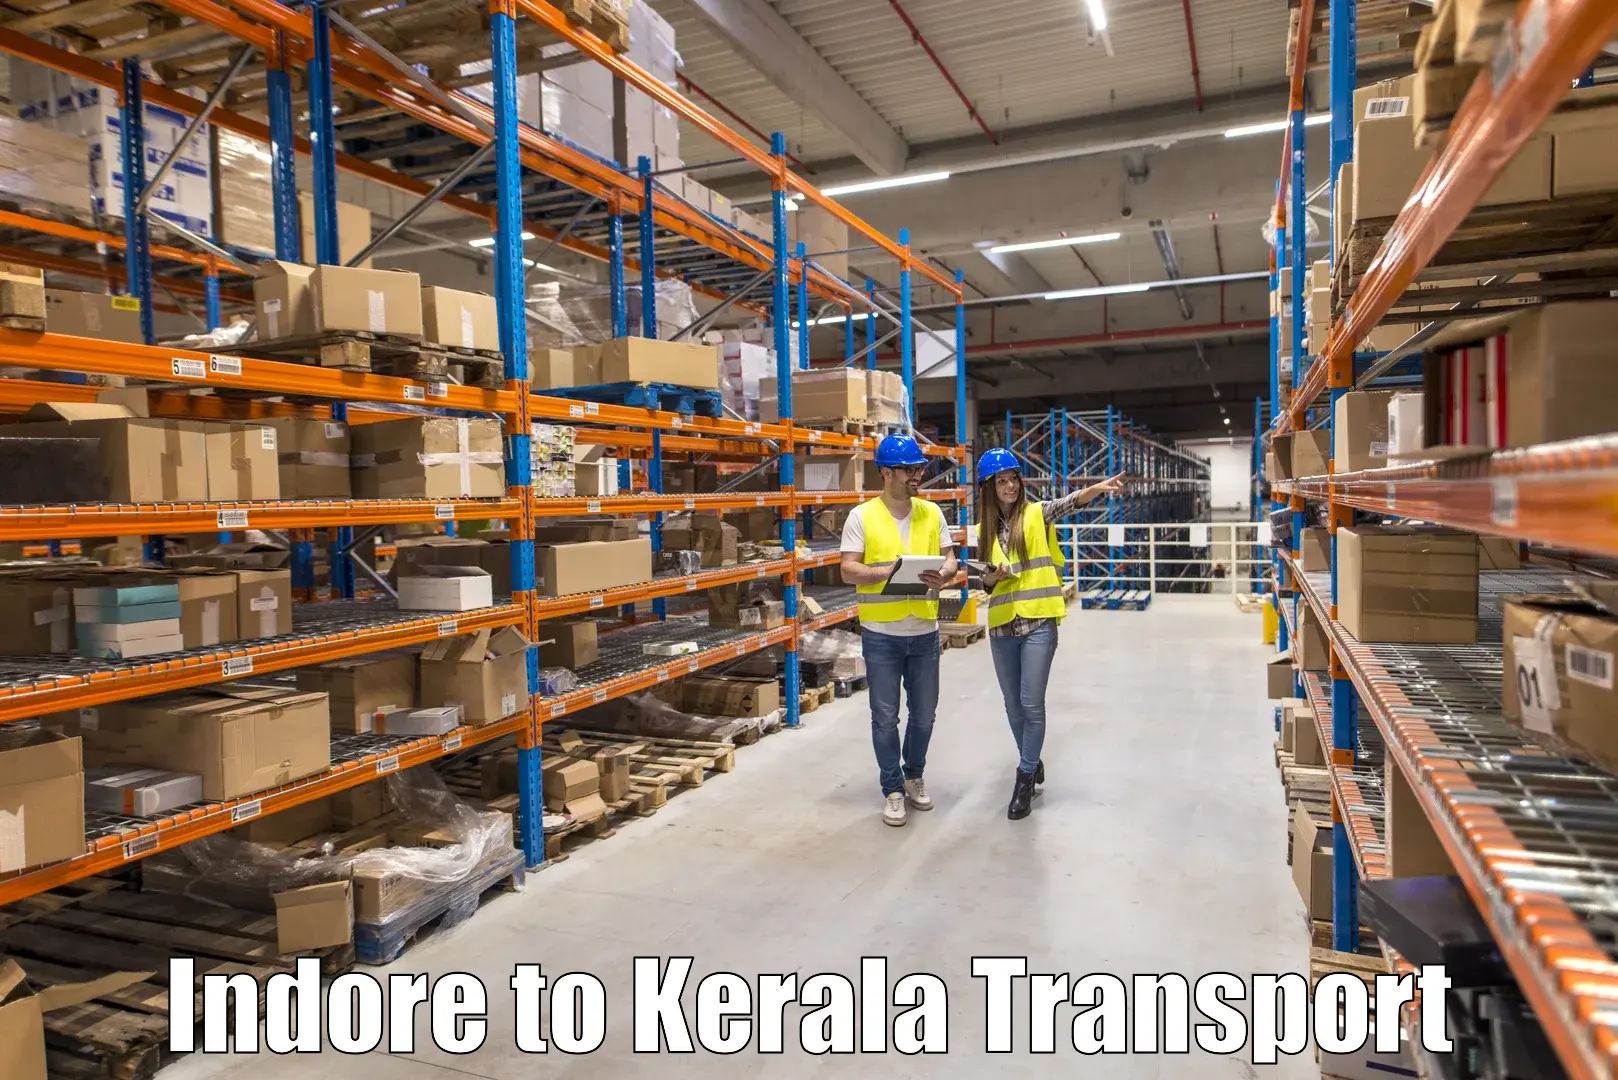 Daily parcel service transport Indore to Kochi